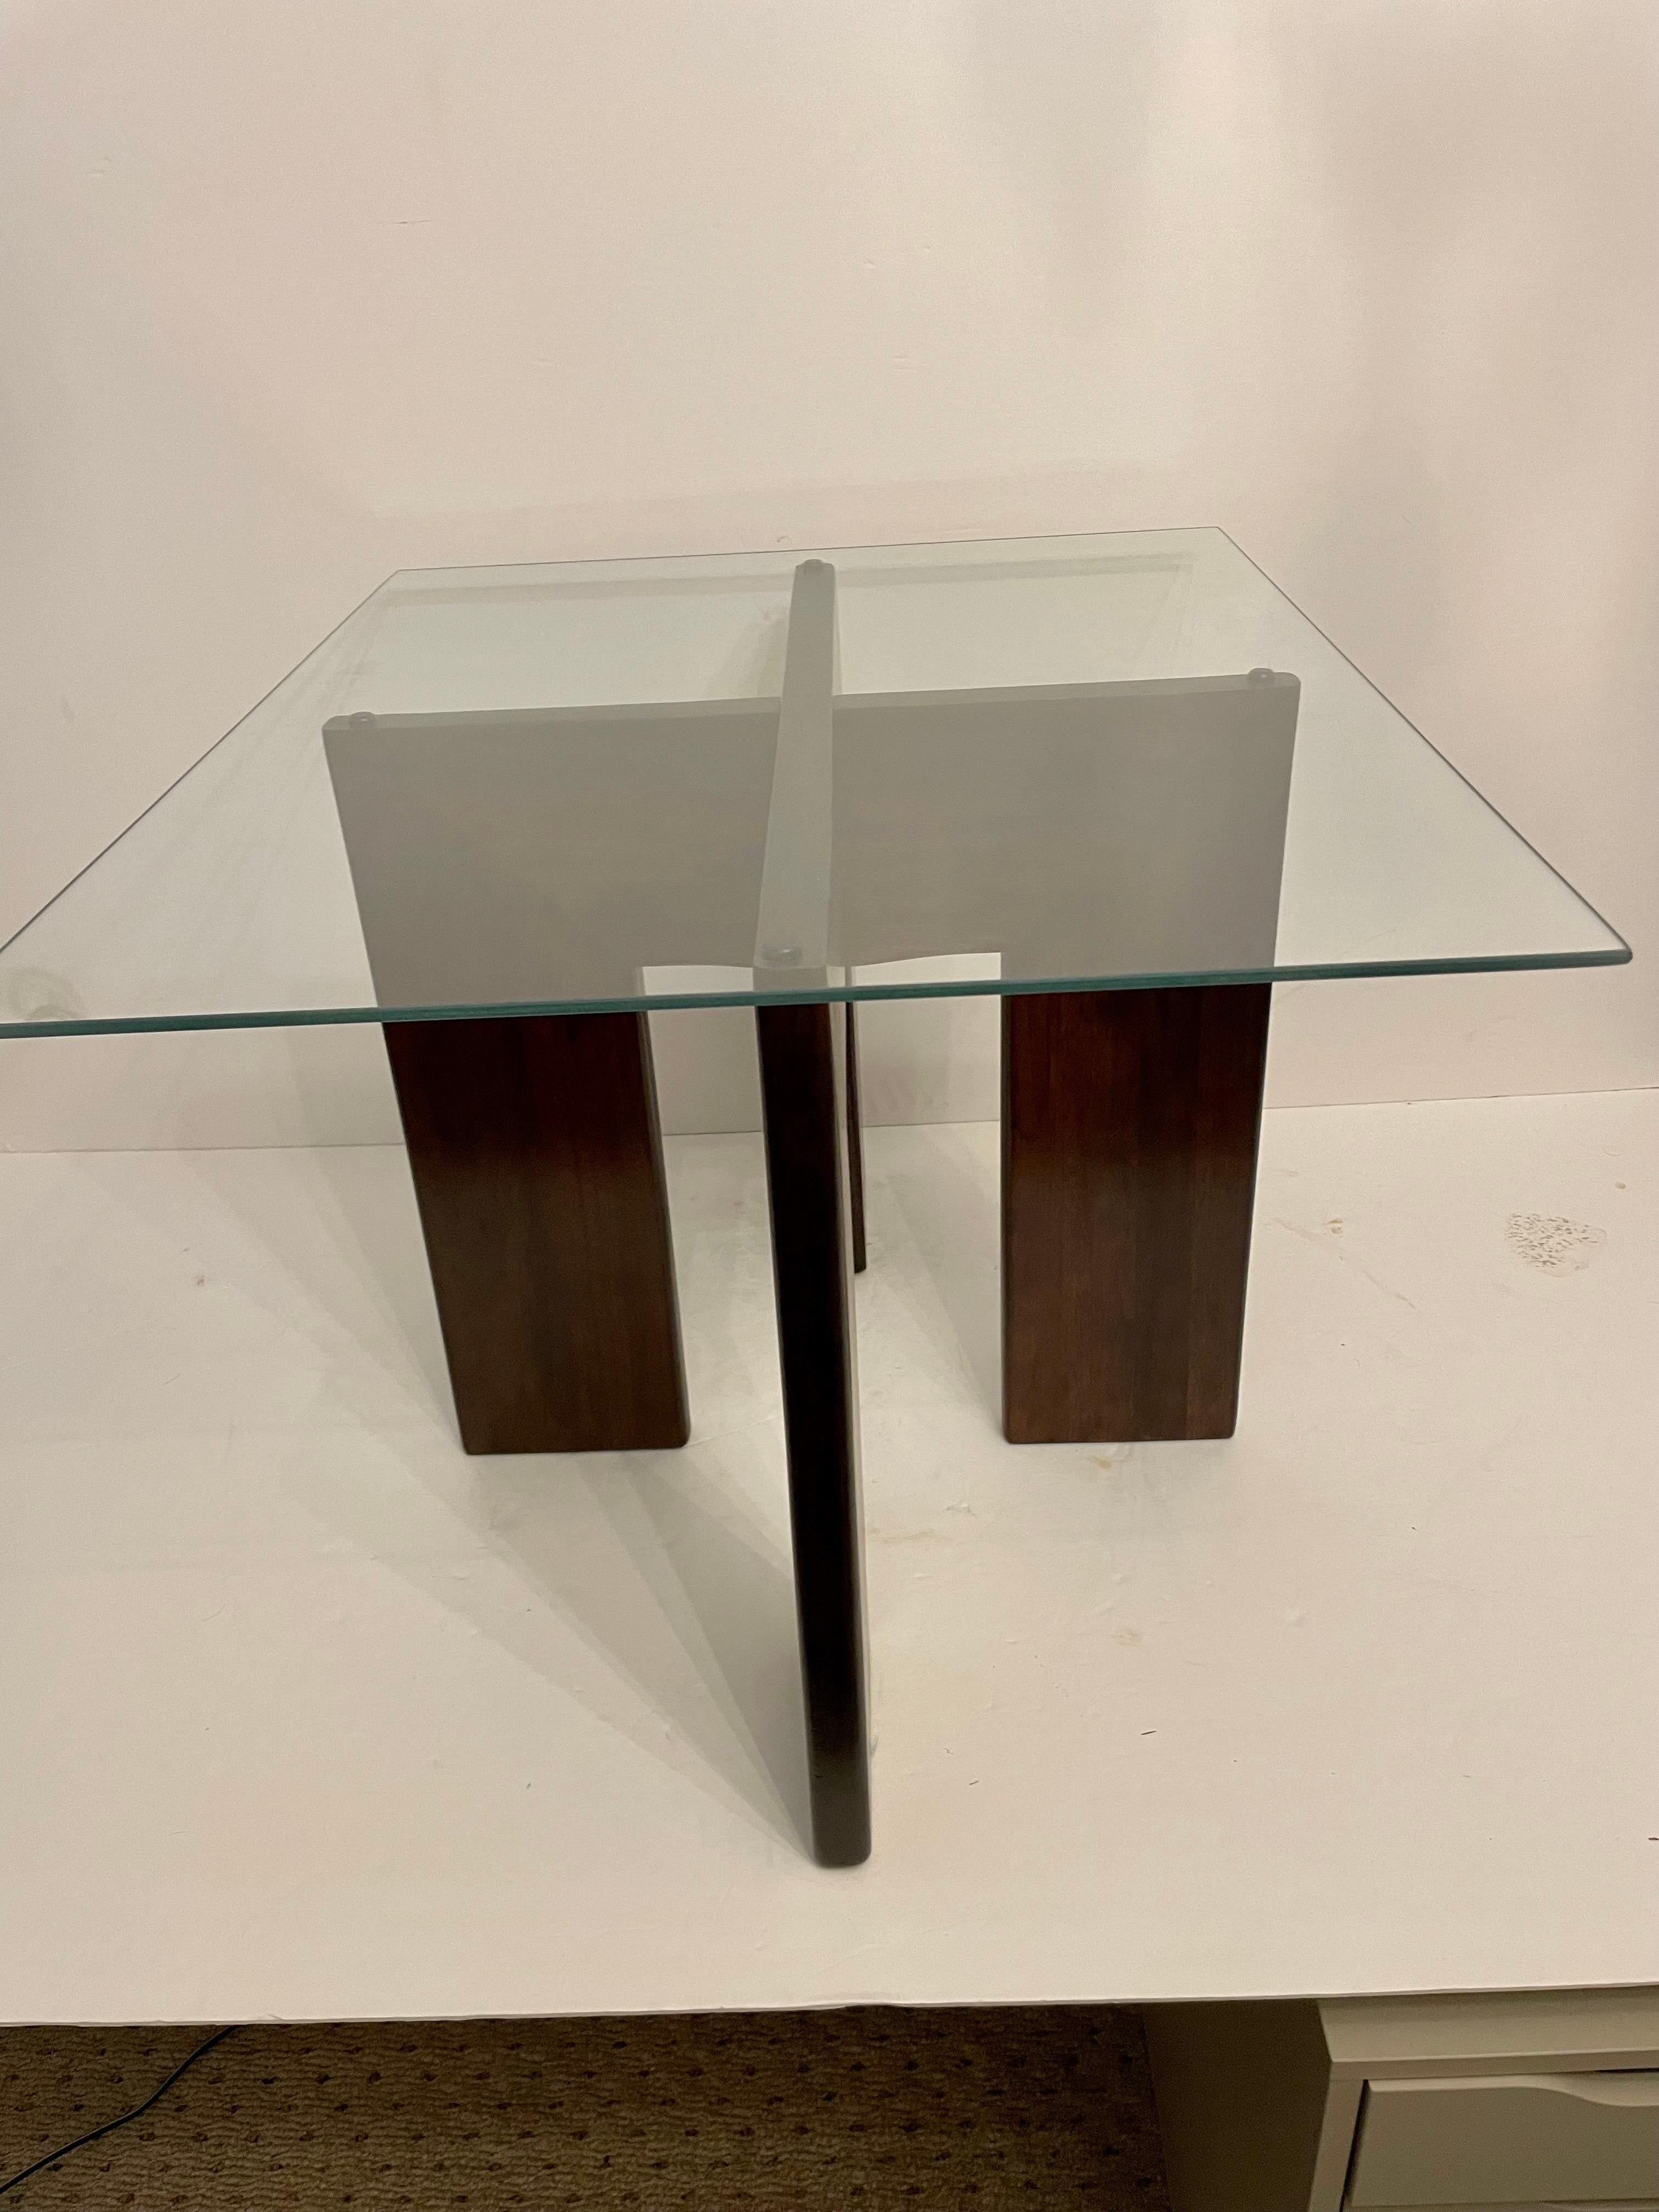 1960s walnut and glass side table by Adrian Pearsall for Craft Associates. Very nice walnut grain and new 22